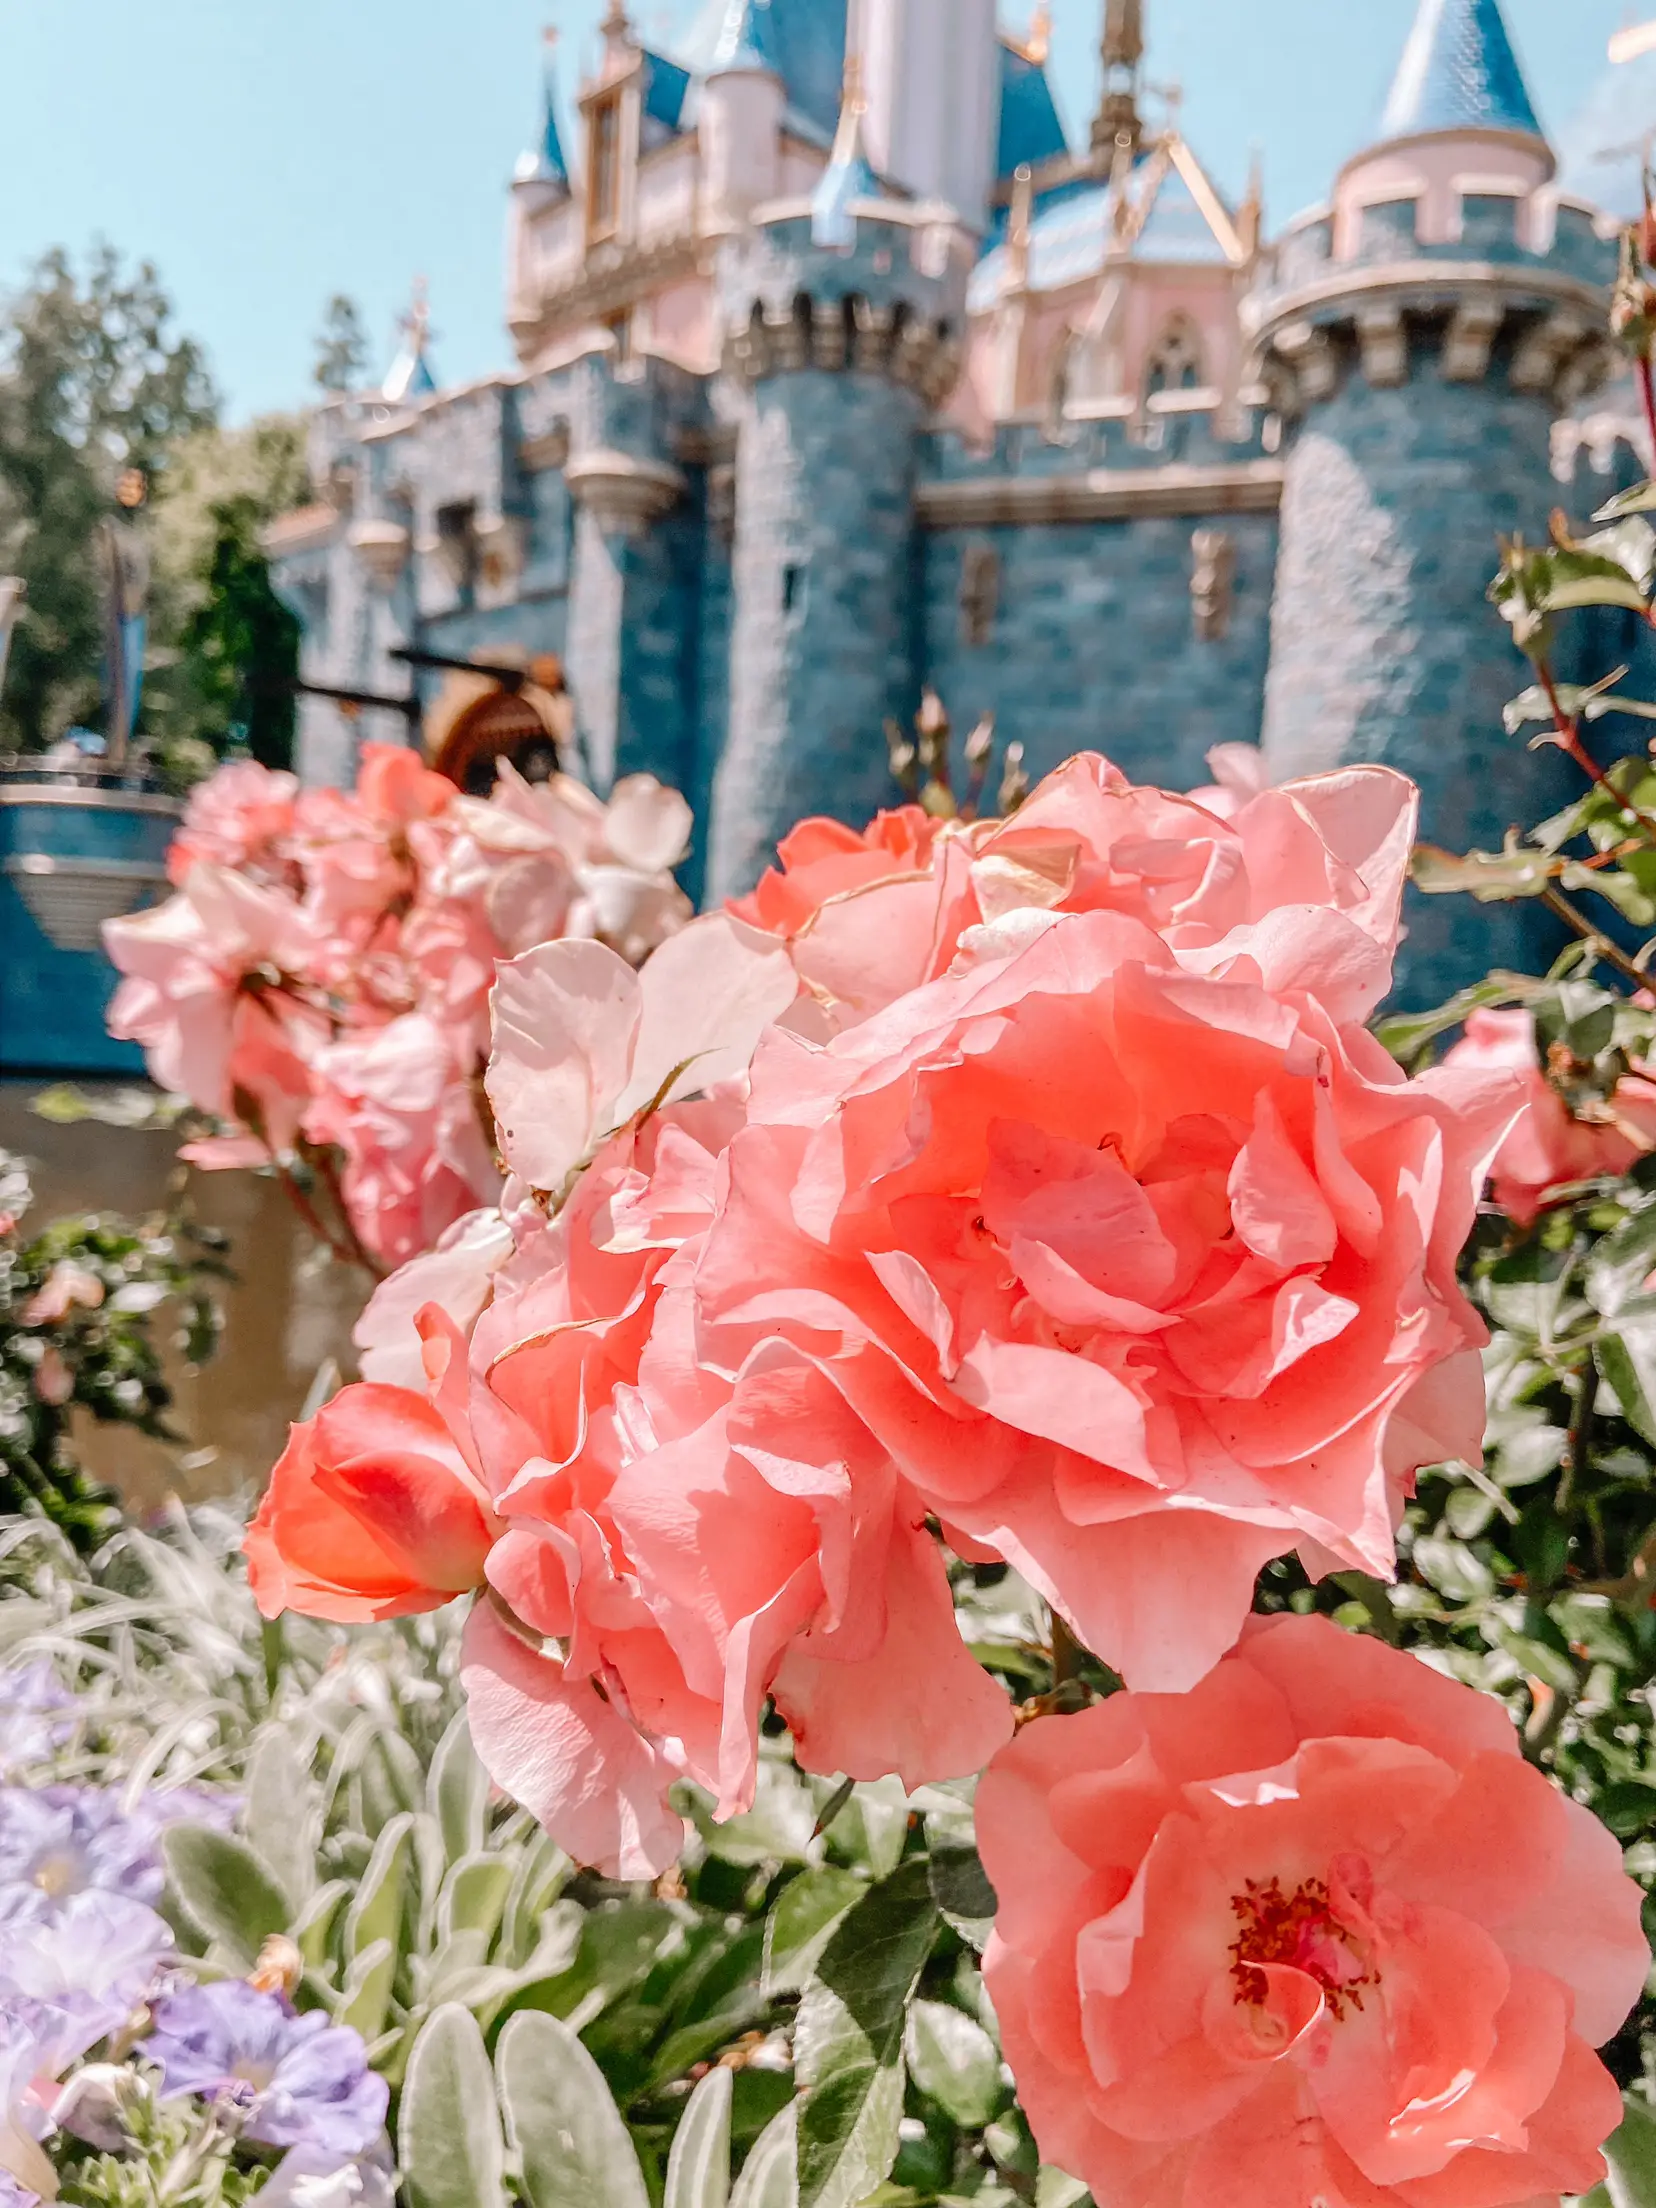  A flower garden with a castle in the background.